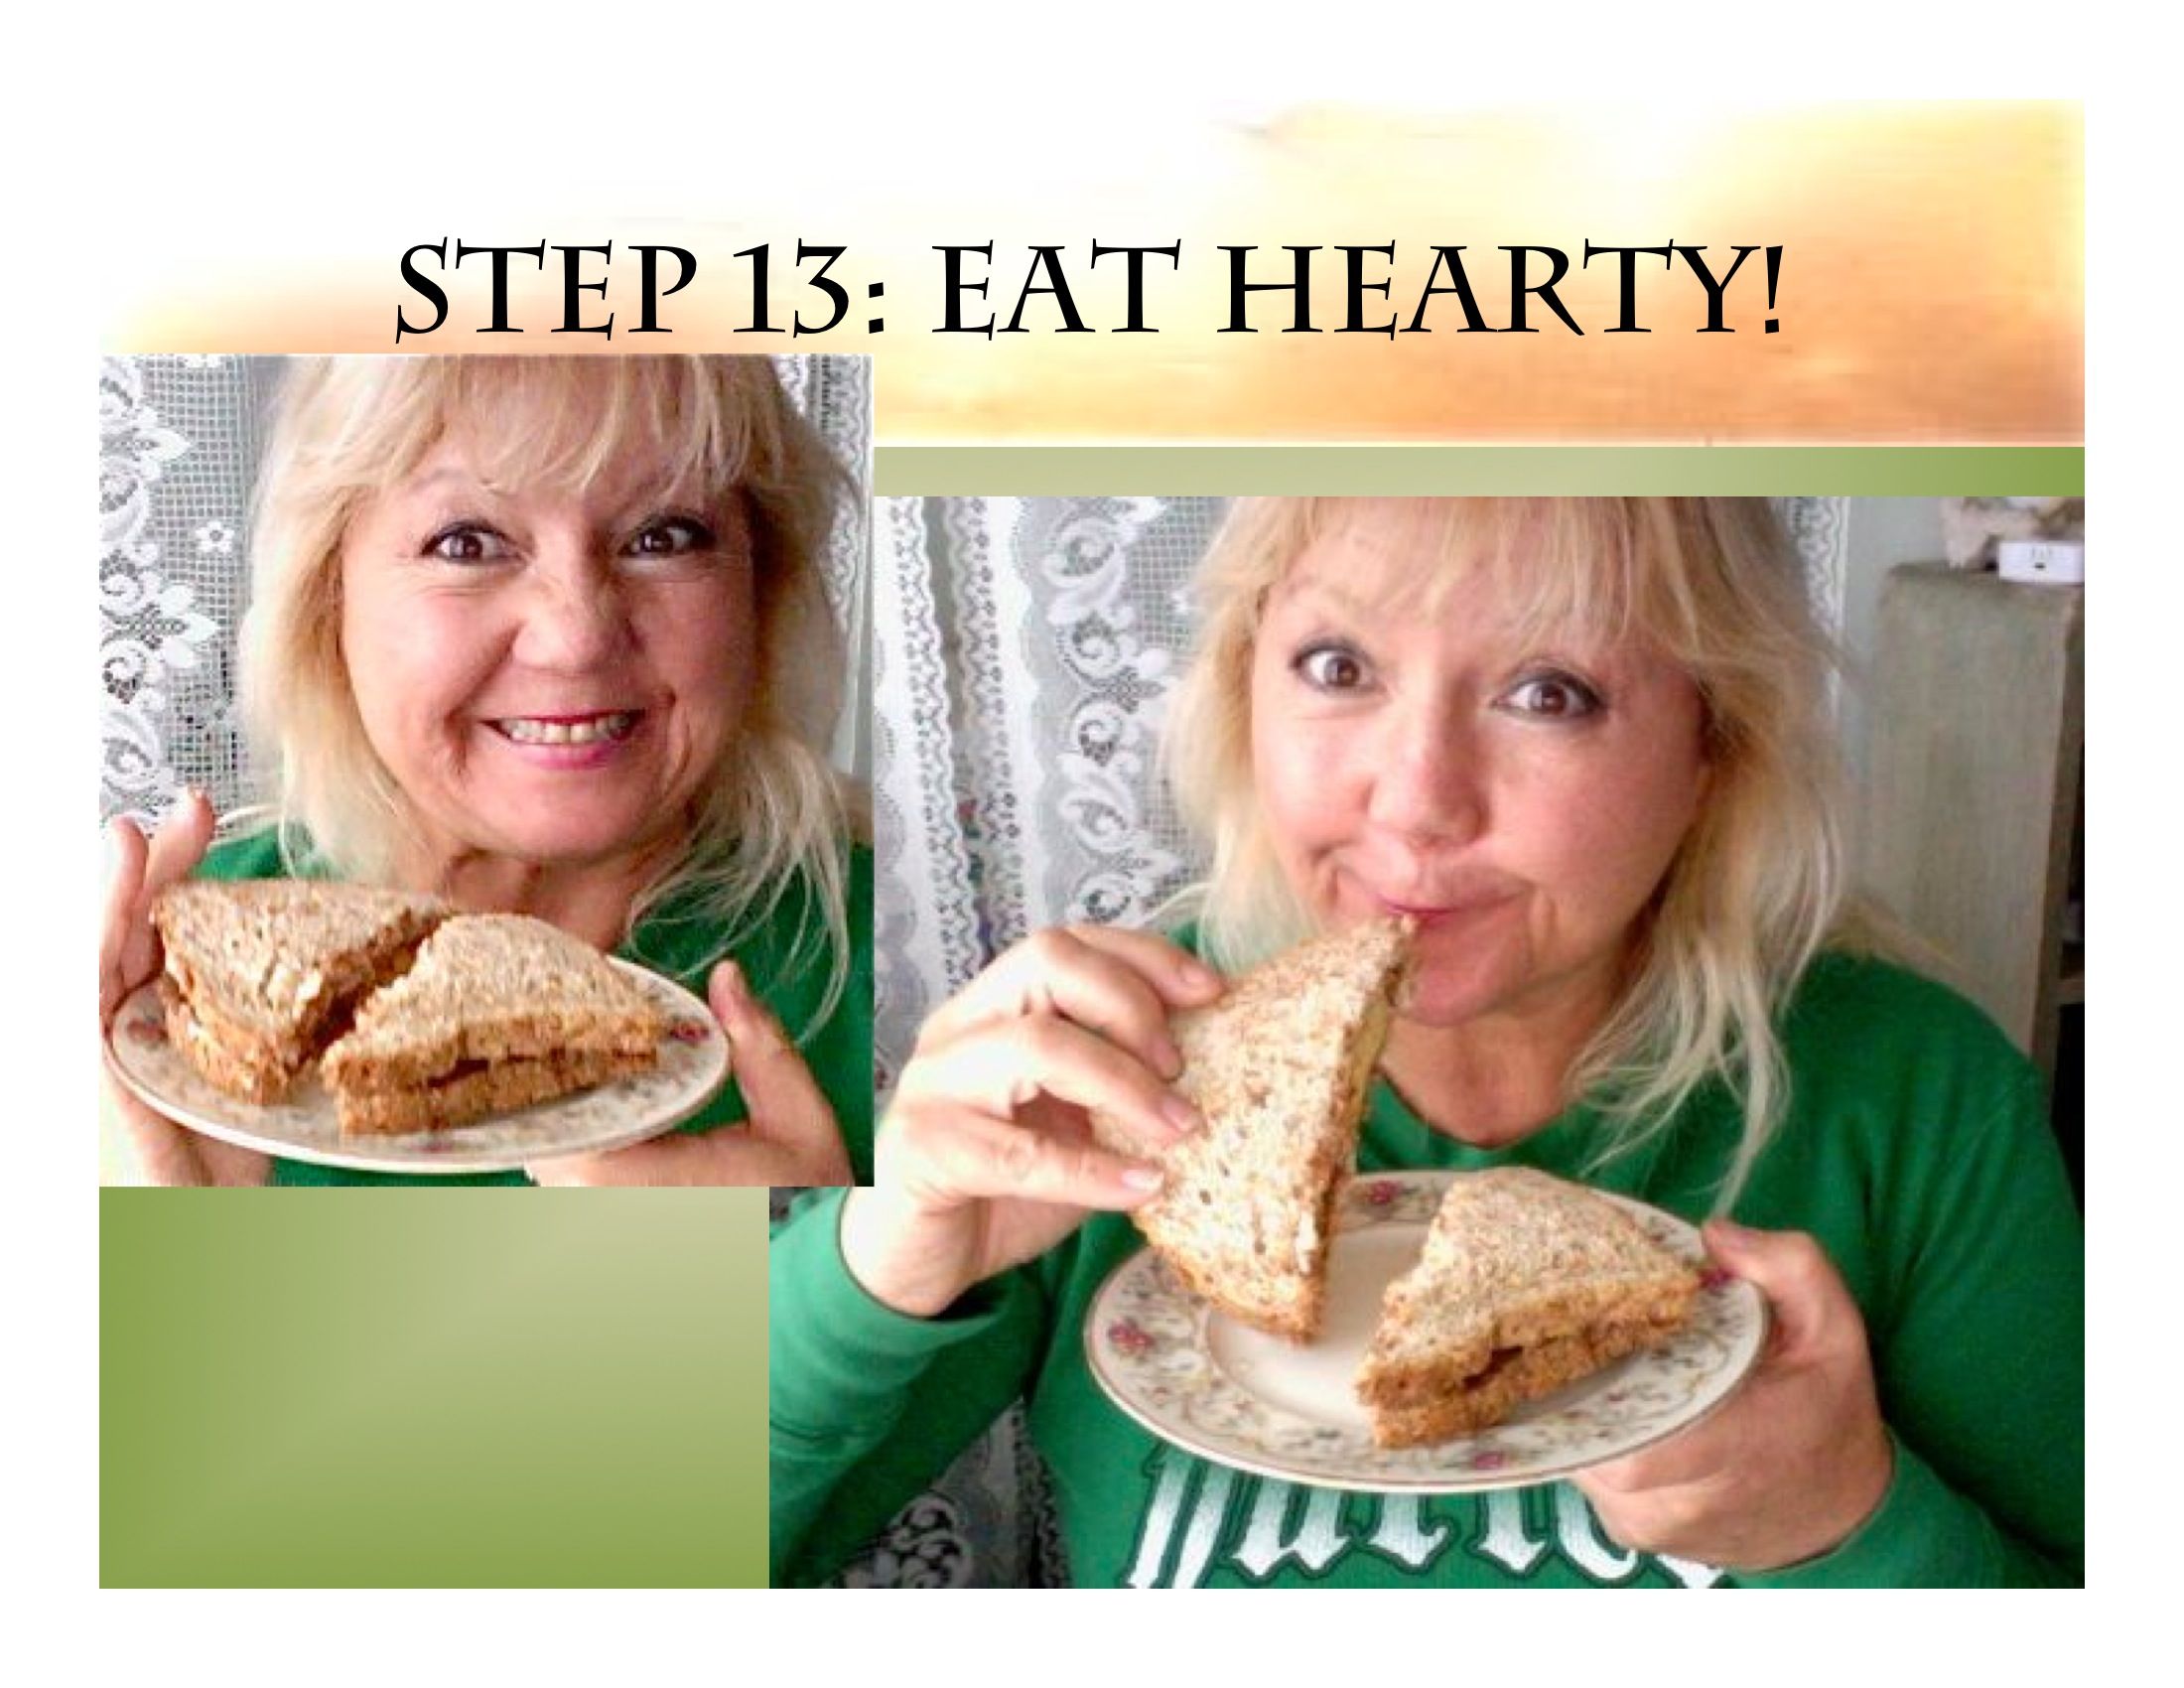 Step 13: Eat Hearty!